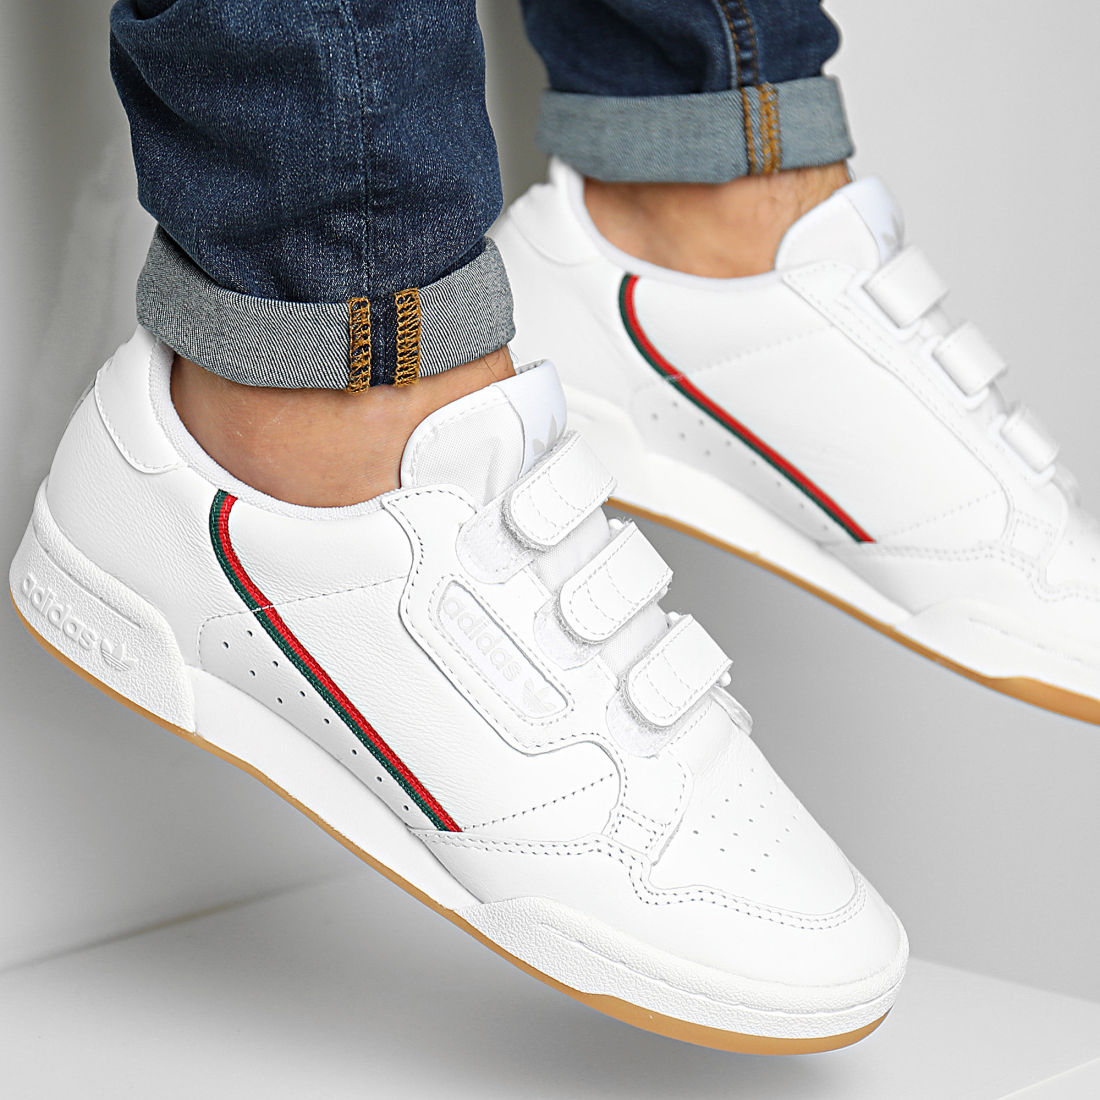 adidas - Baskets Continental 80 Strap EE5359 Footwear White Coral 